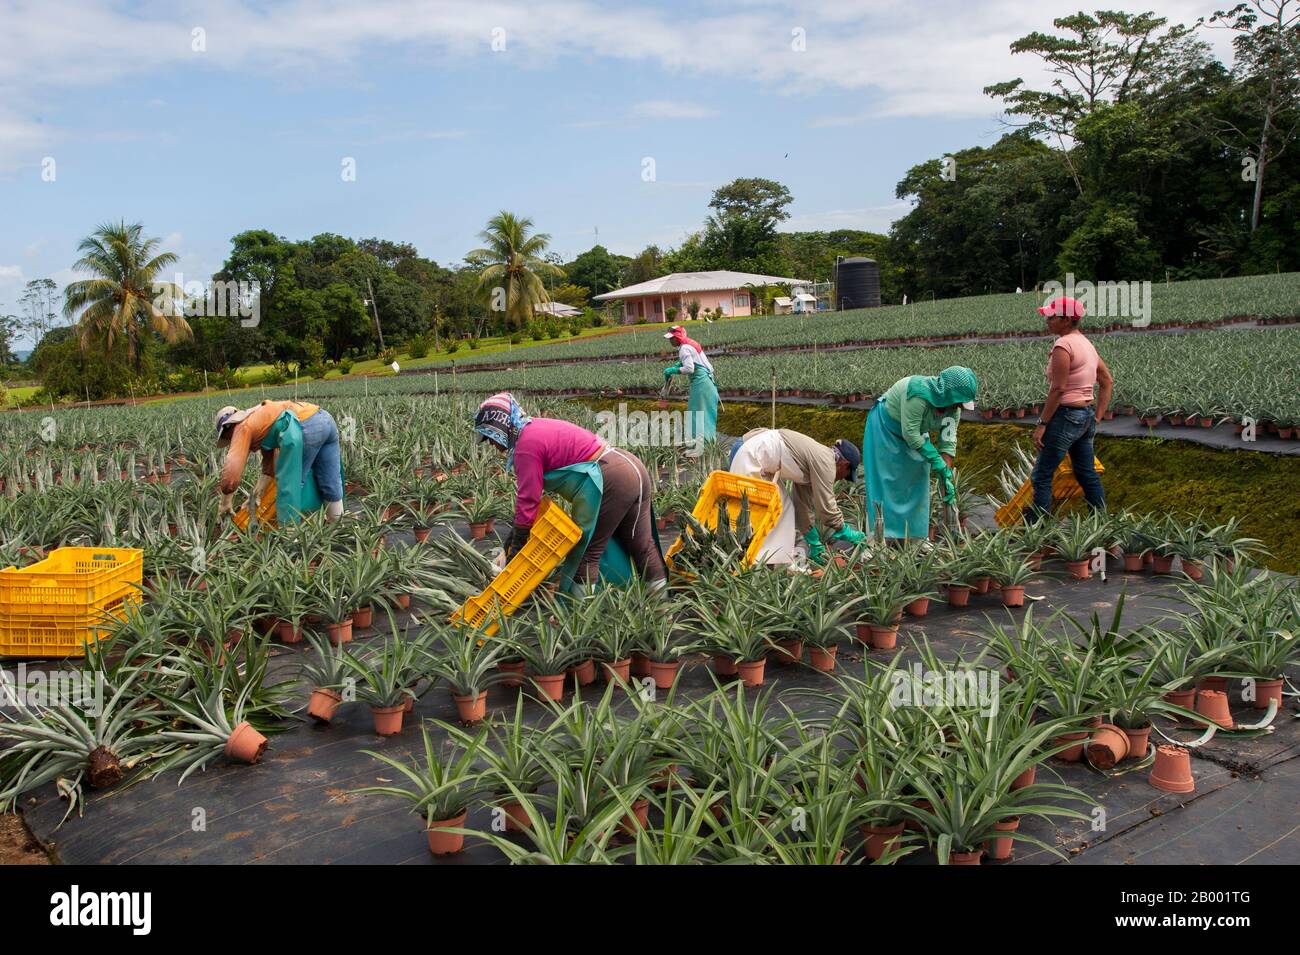 Workers in a pineapple field at the Finca Corsicana in Costa Rica, a pineapple farm owned by a Texas company, Collin Street Bakery. Stock Photo